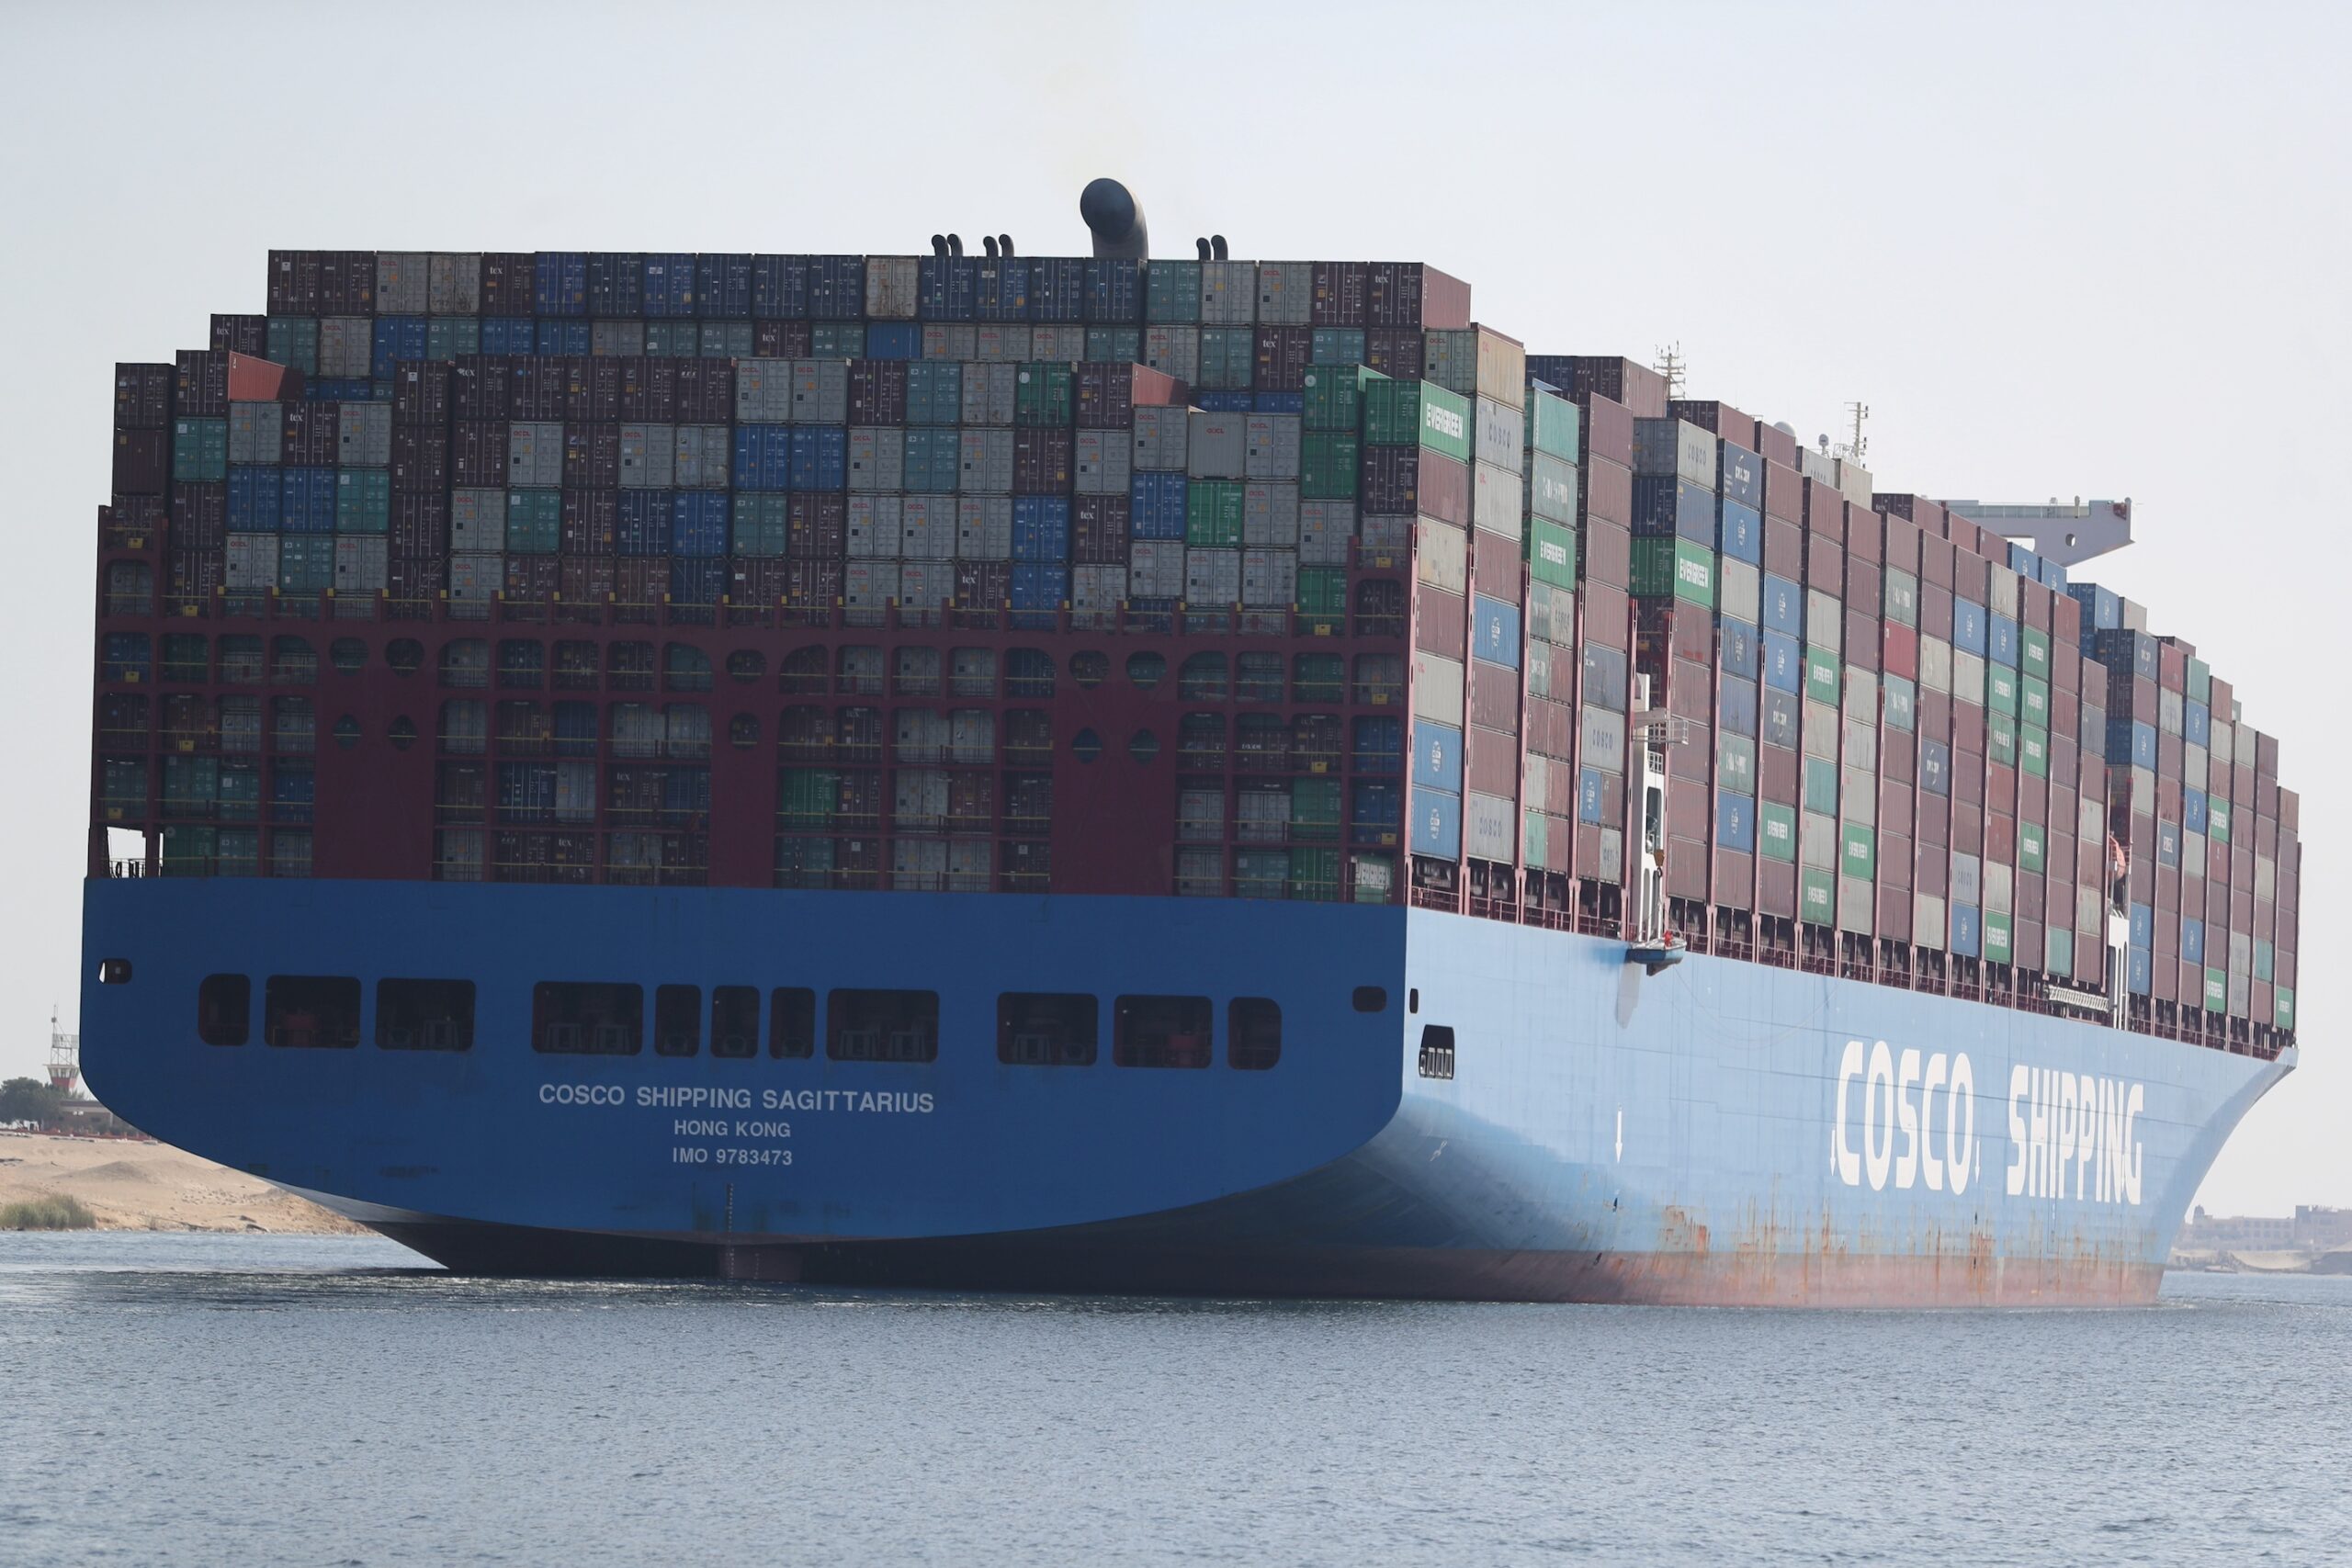 A China Ocean Shipping Company (COSCO) craft in the Suez Canal. More than half of China's exports to Europe pass through the canal